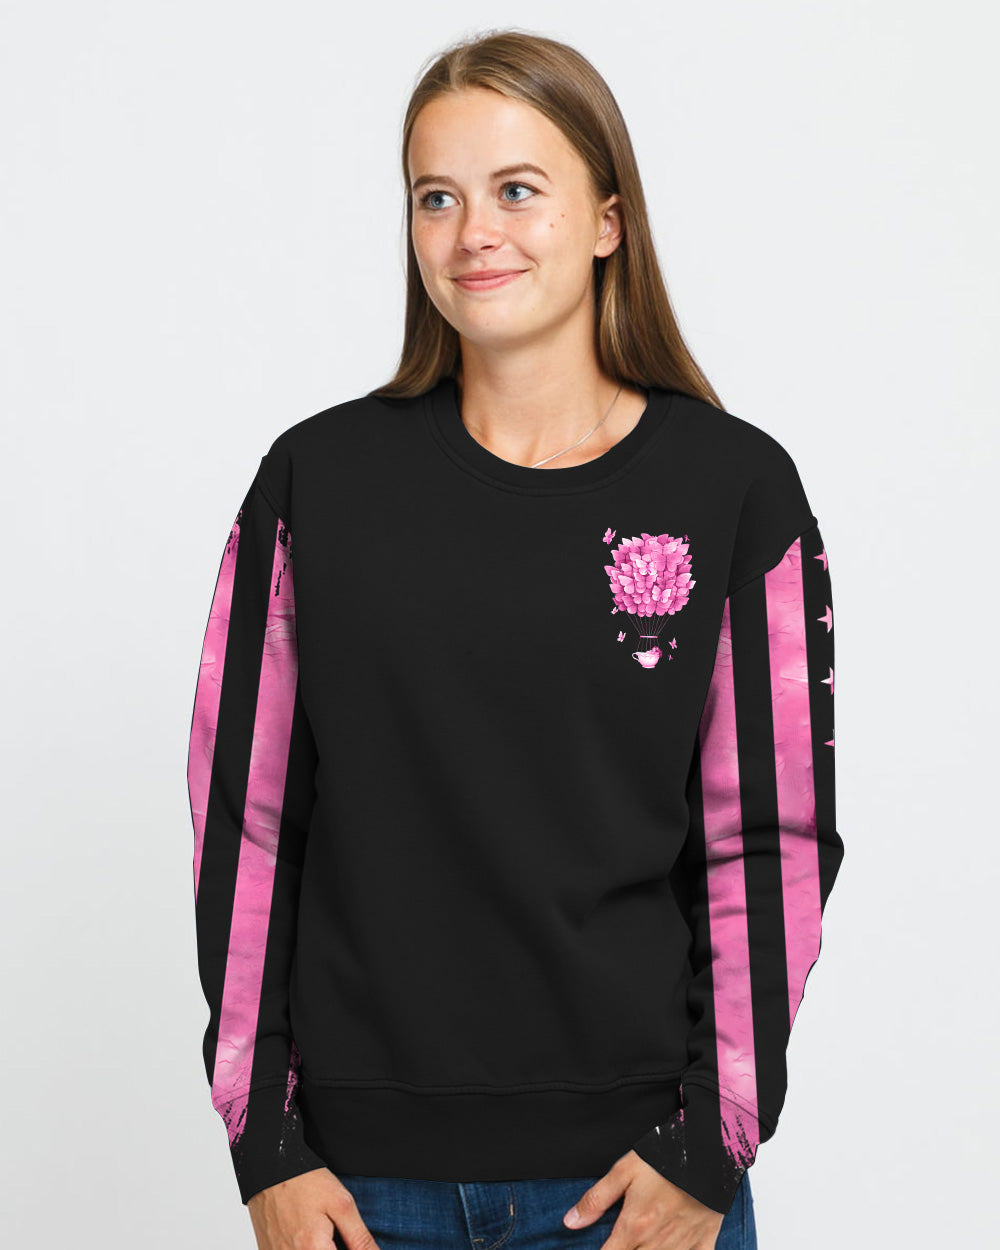 Hope For A Cure Butterfly Air Balloon Women's Breast Cancer Awareness Sweatshirt